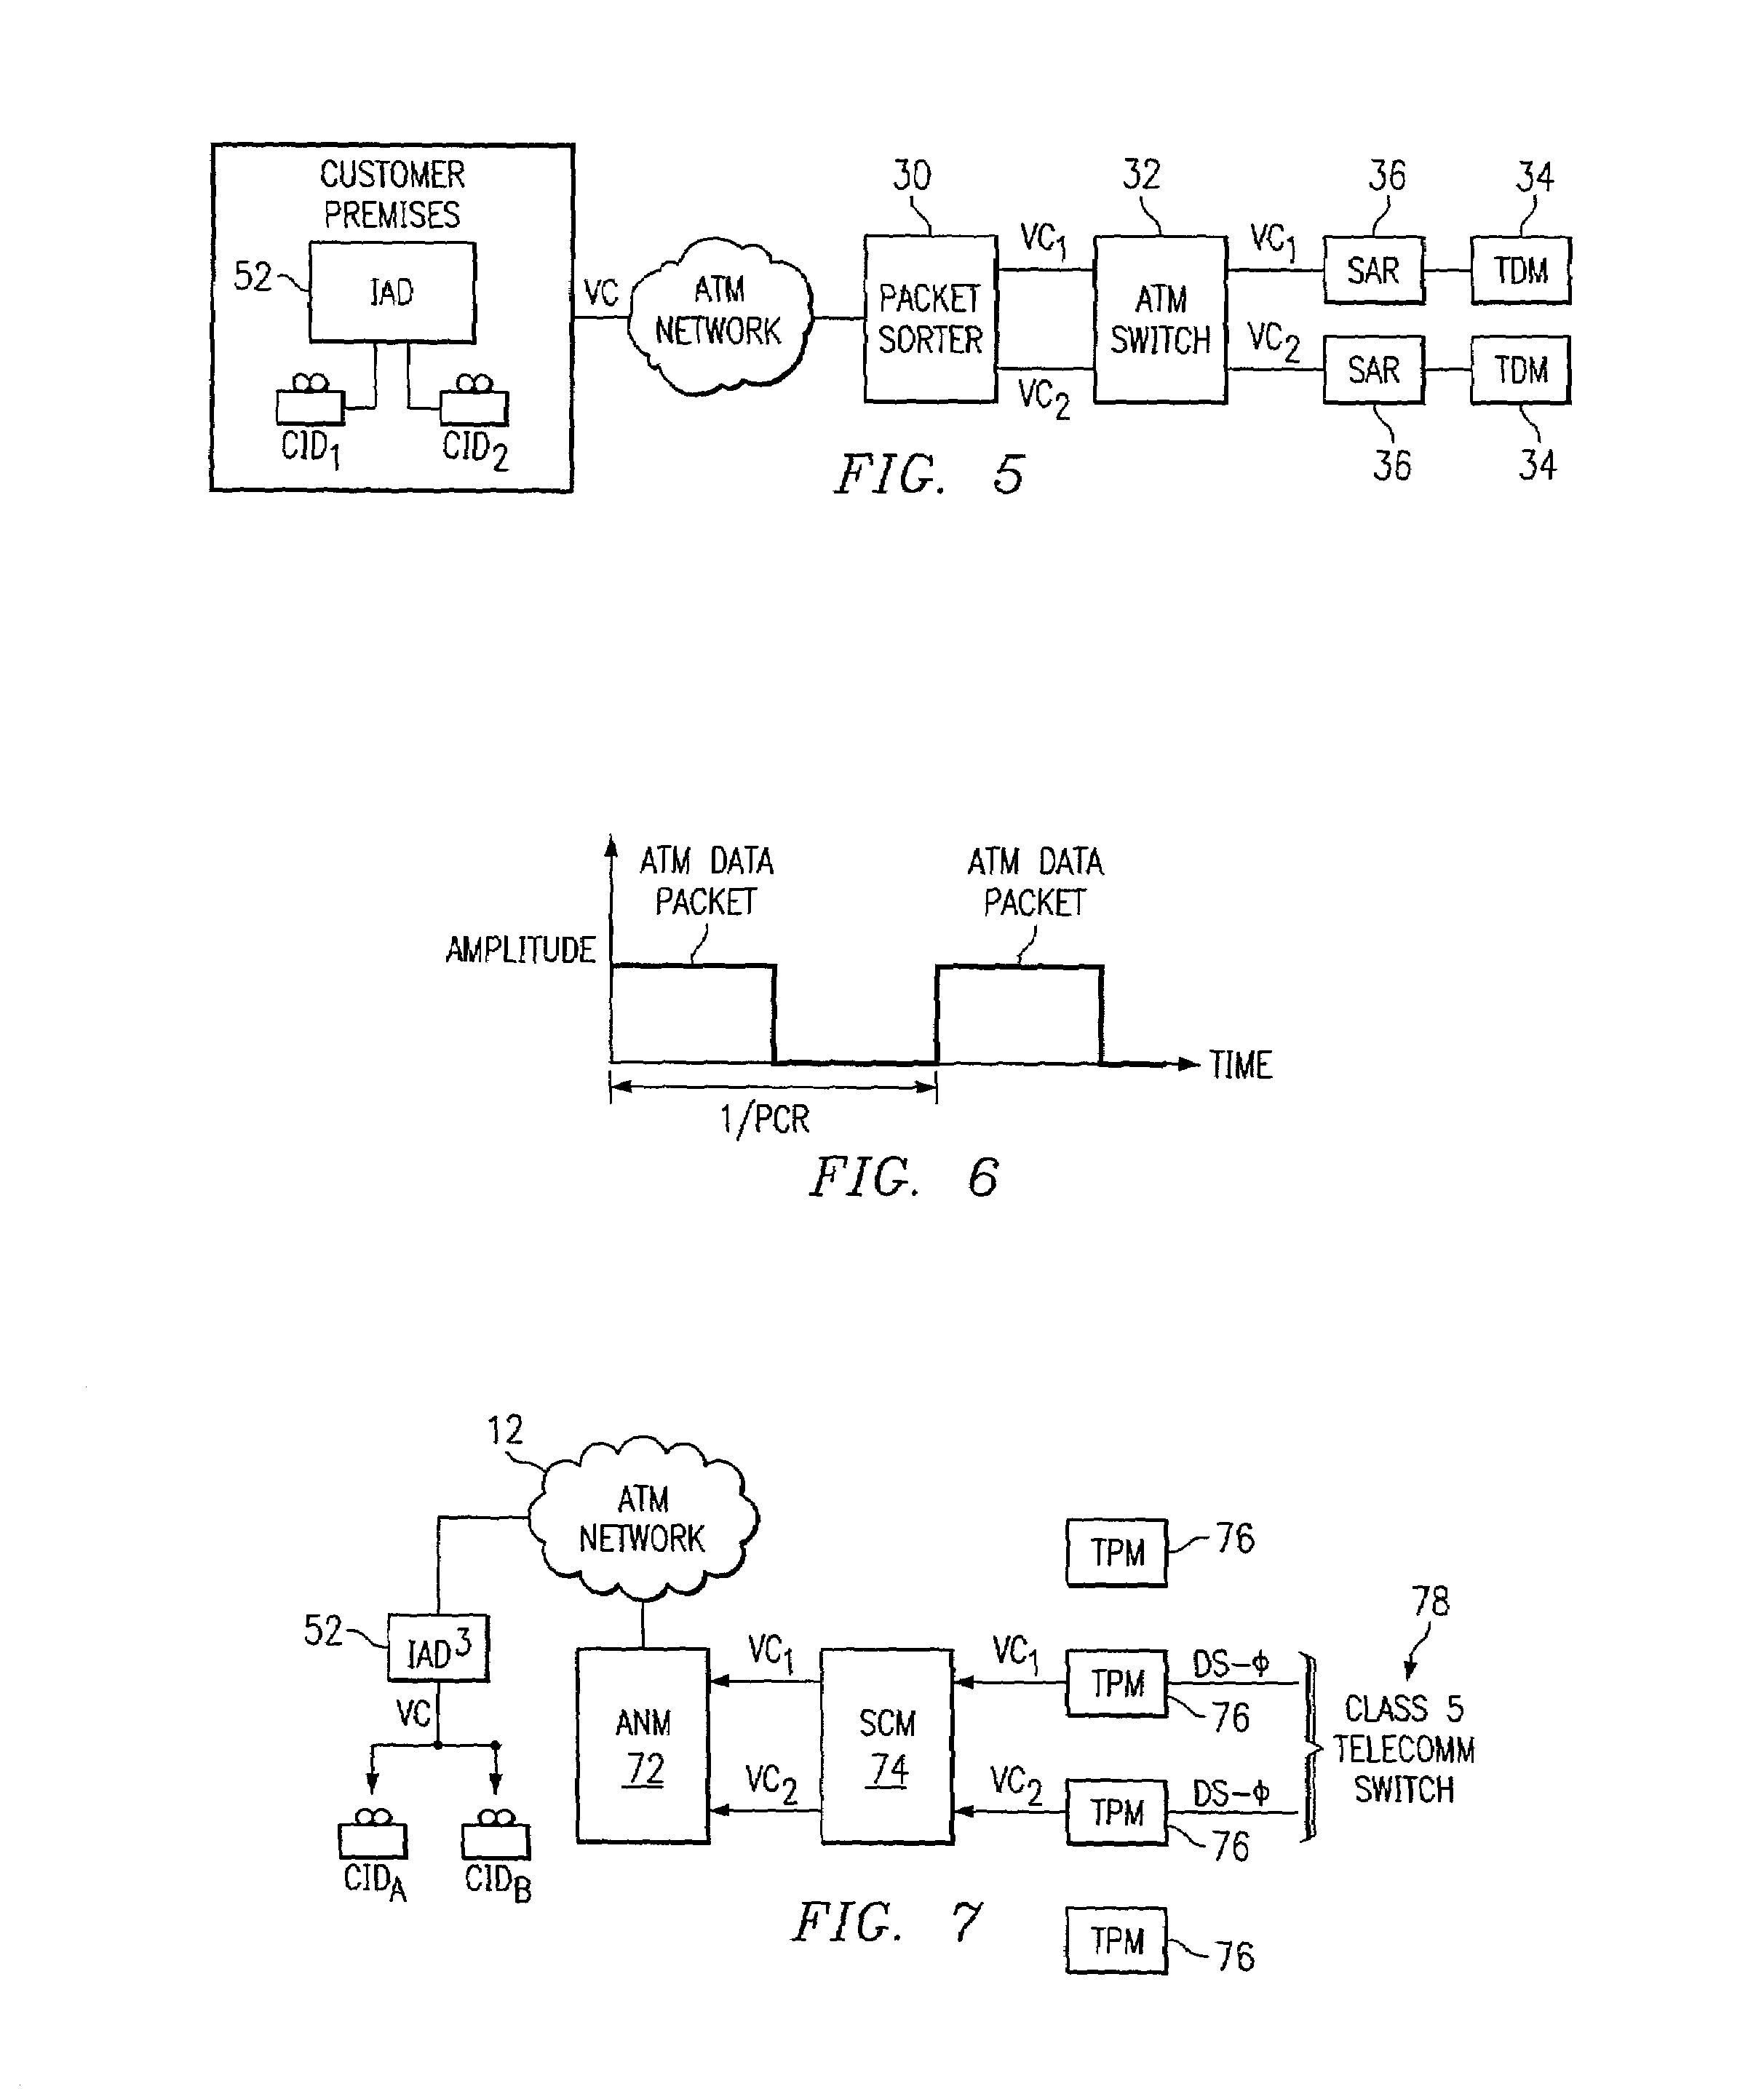 System and method for cross connecting an ATM network and a telecommunication switch